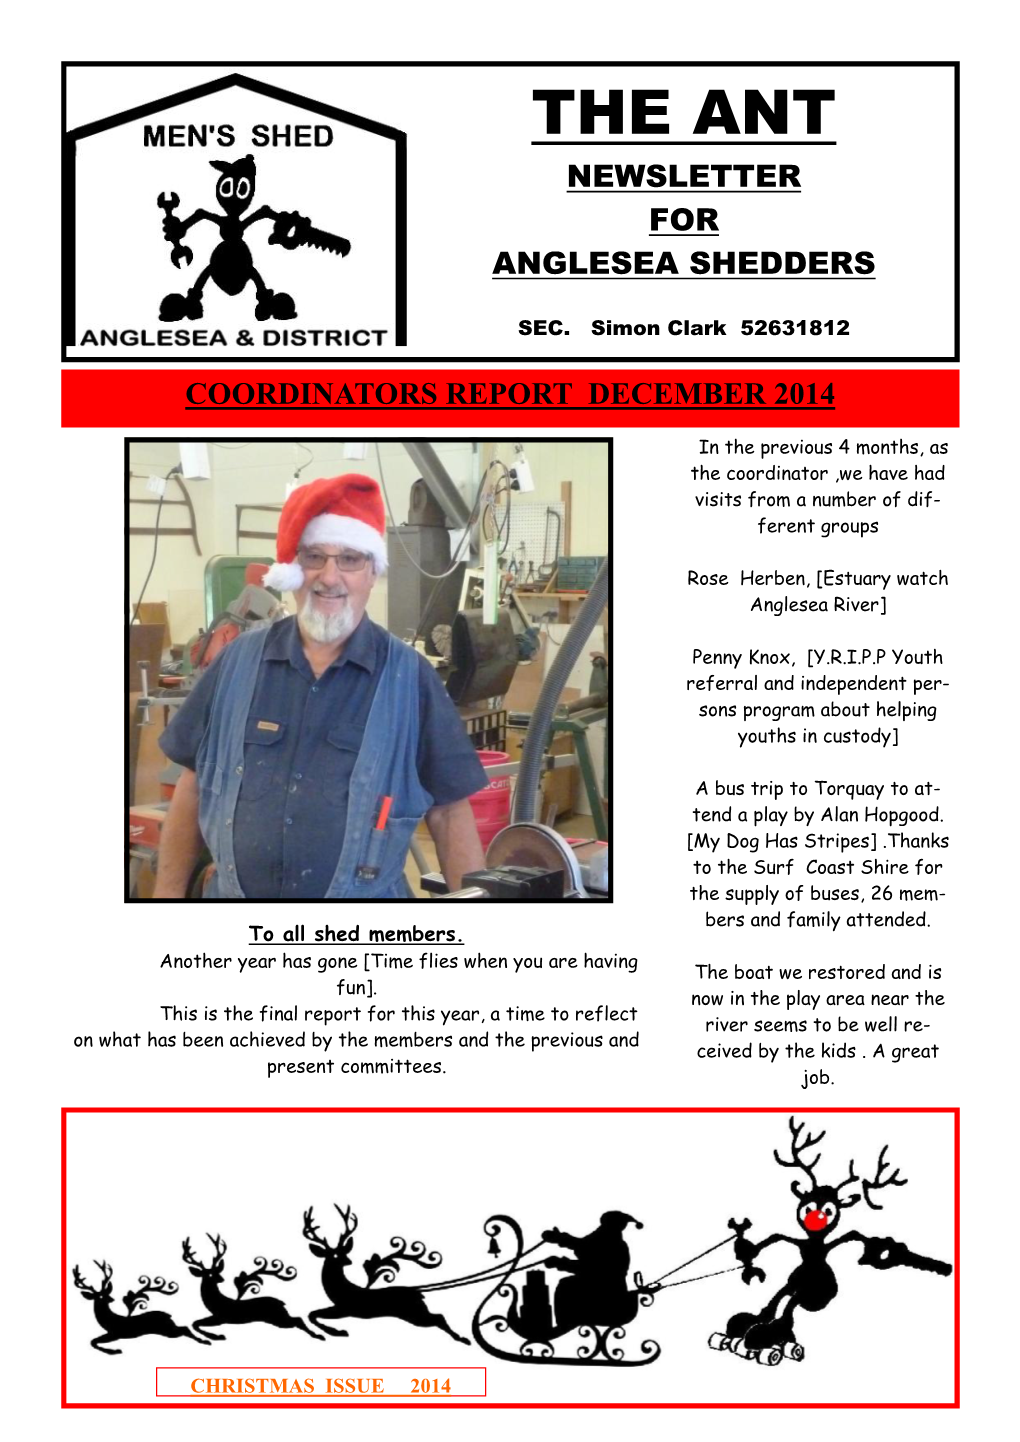 The Ant Newsletter for Anglesea Shedders